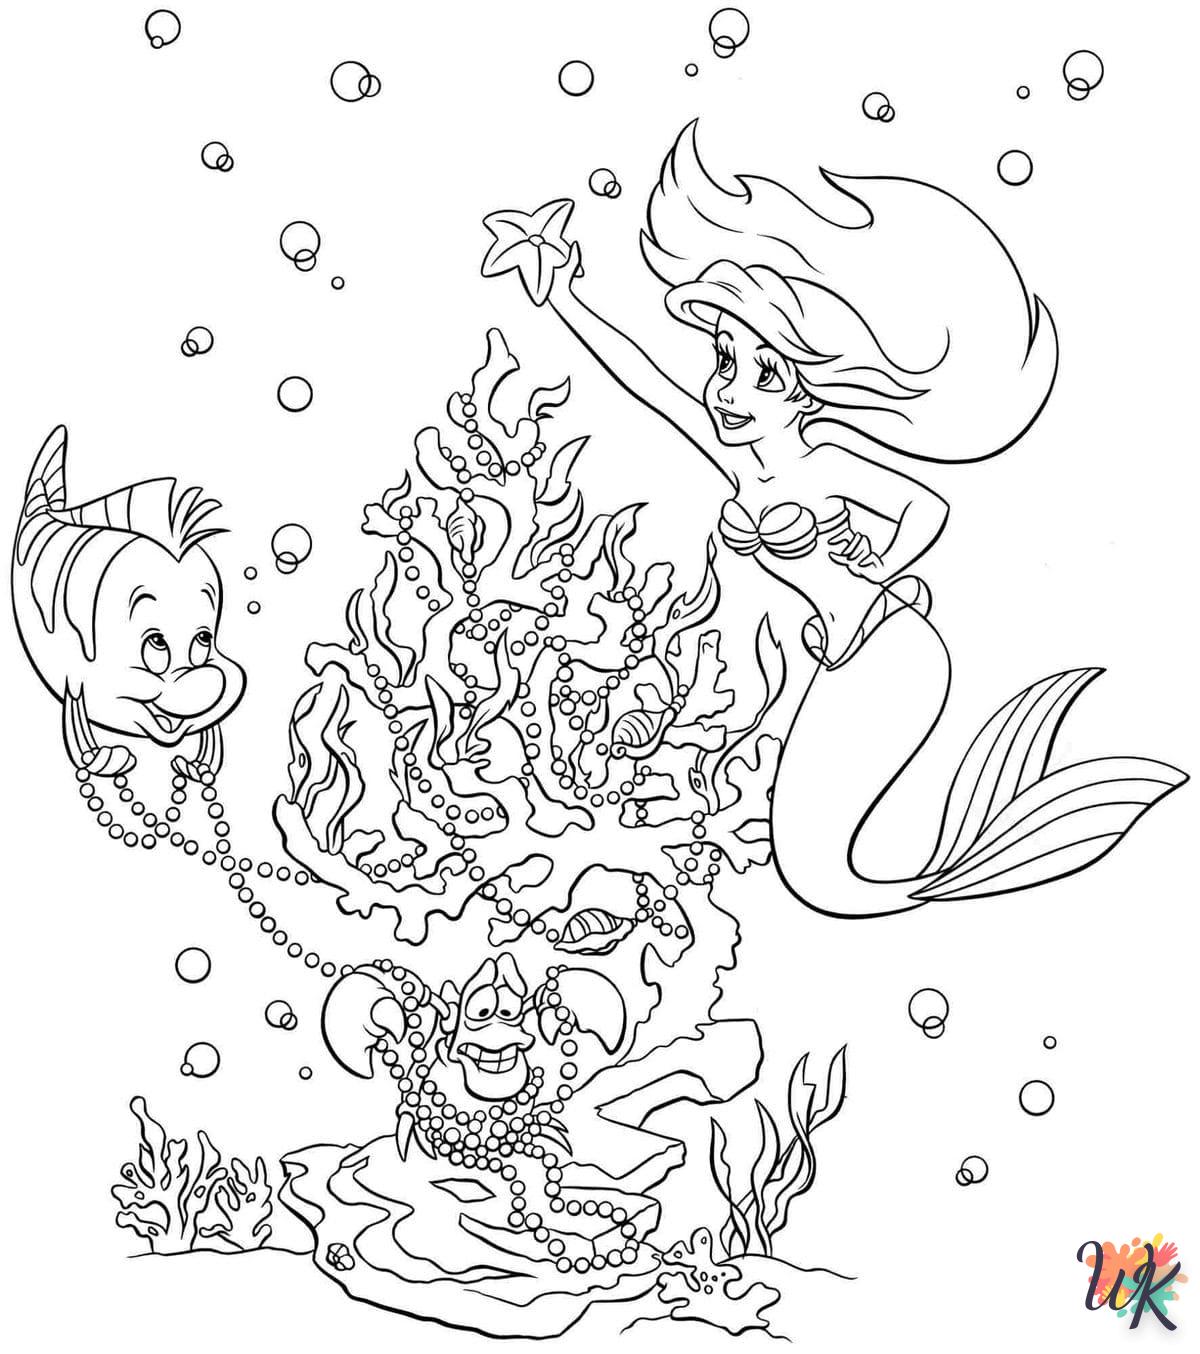 Disney coloring page for children to print 2